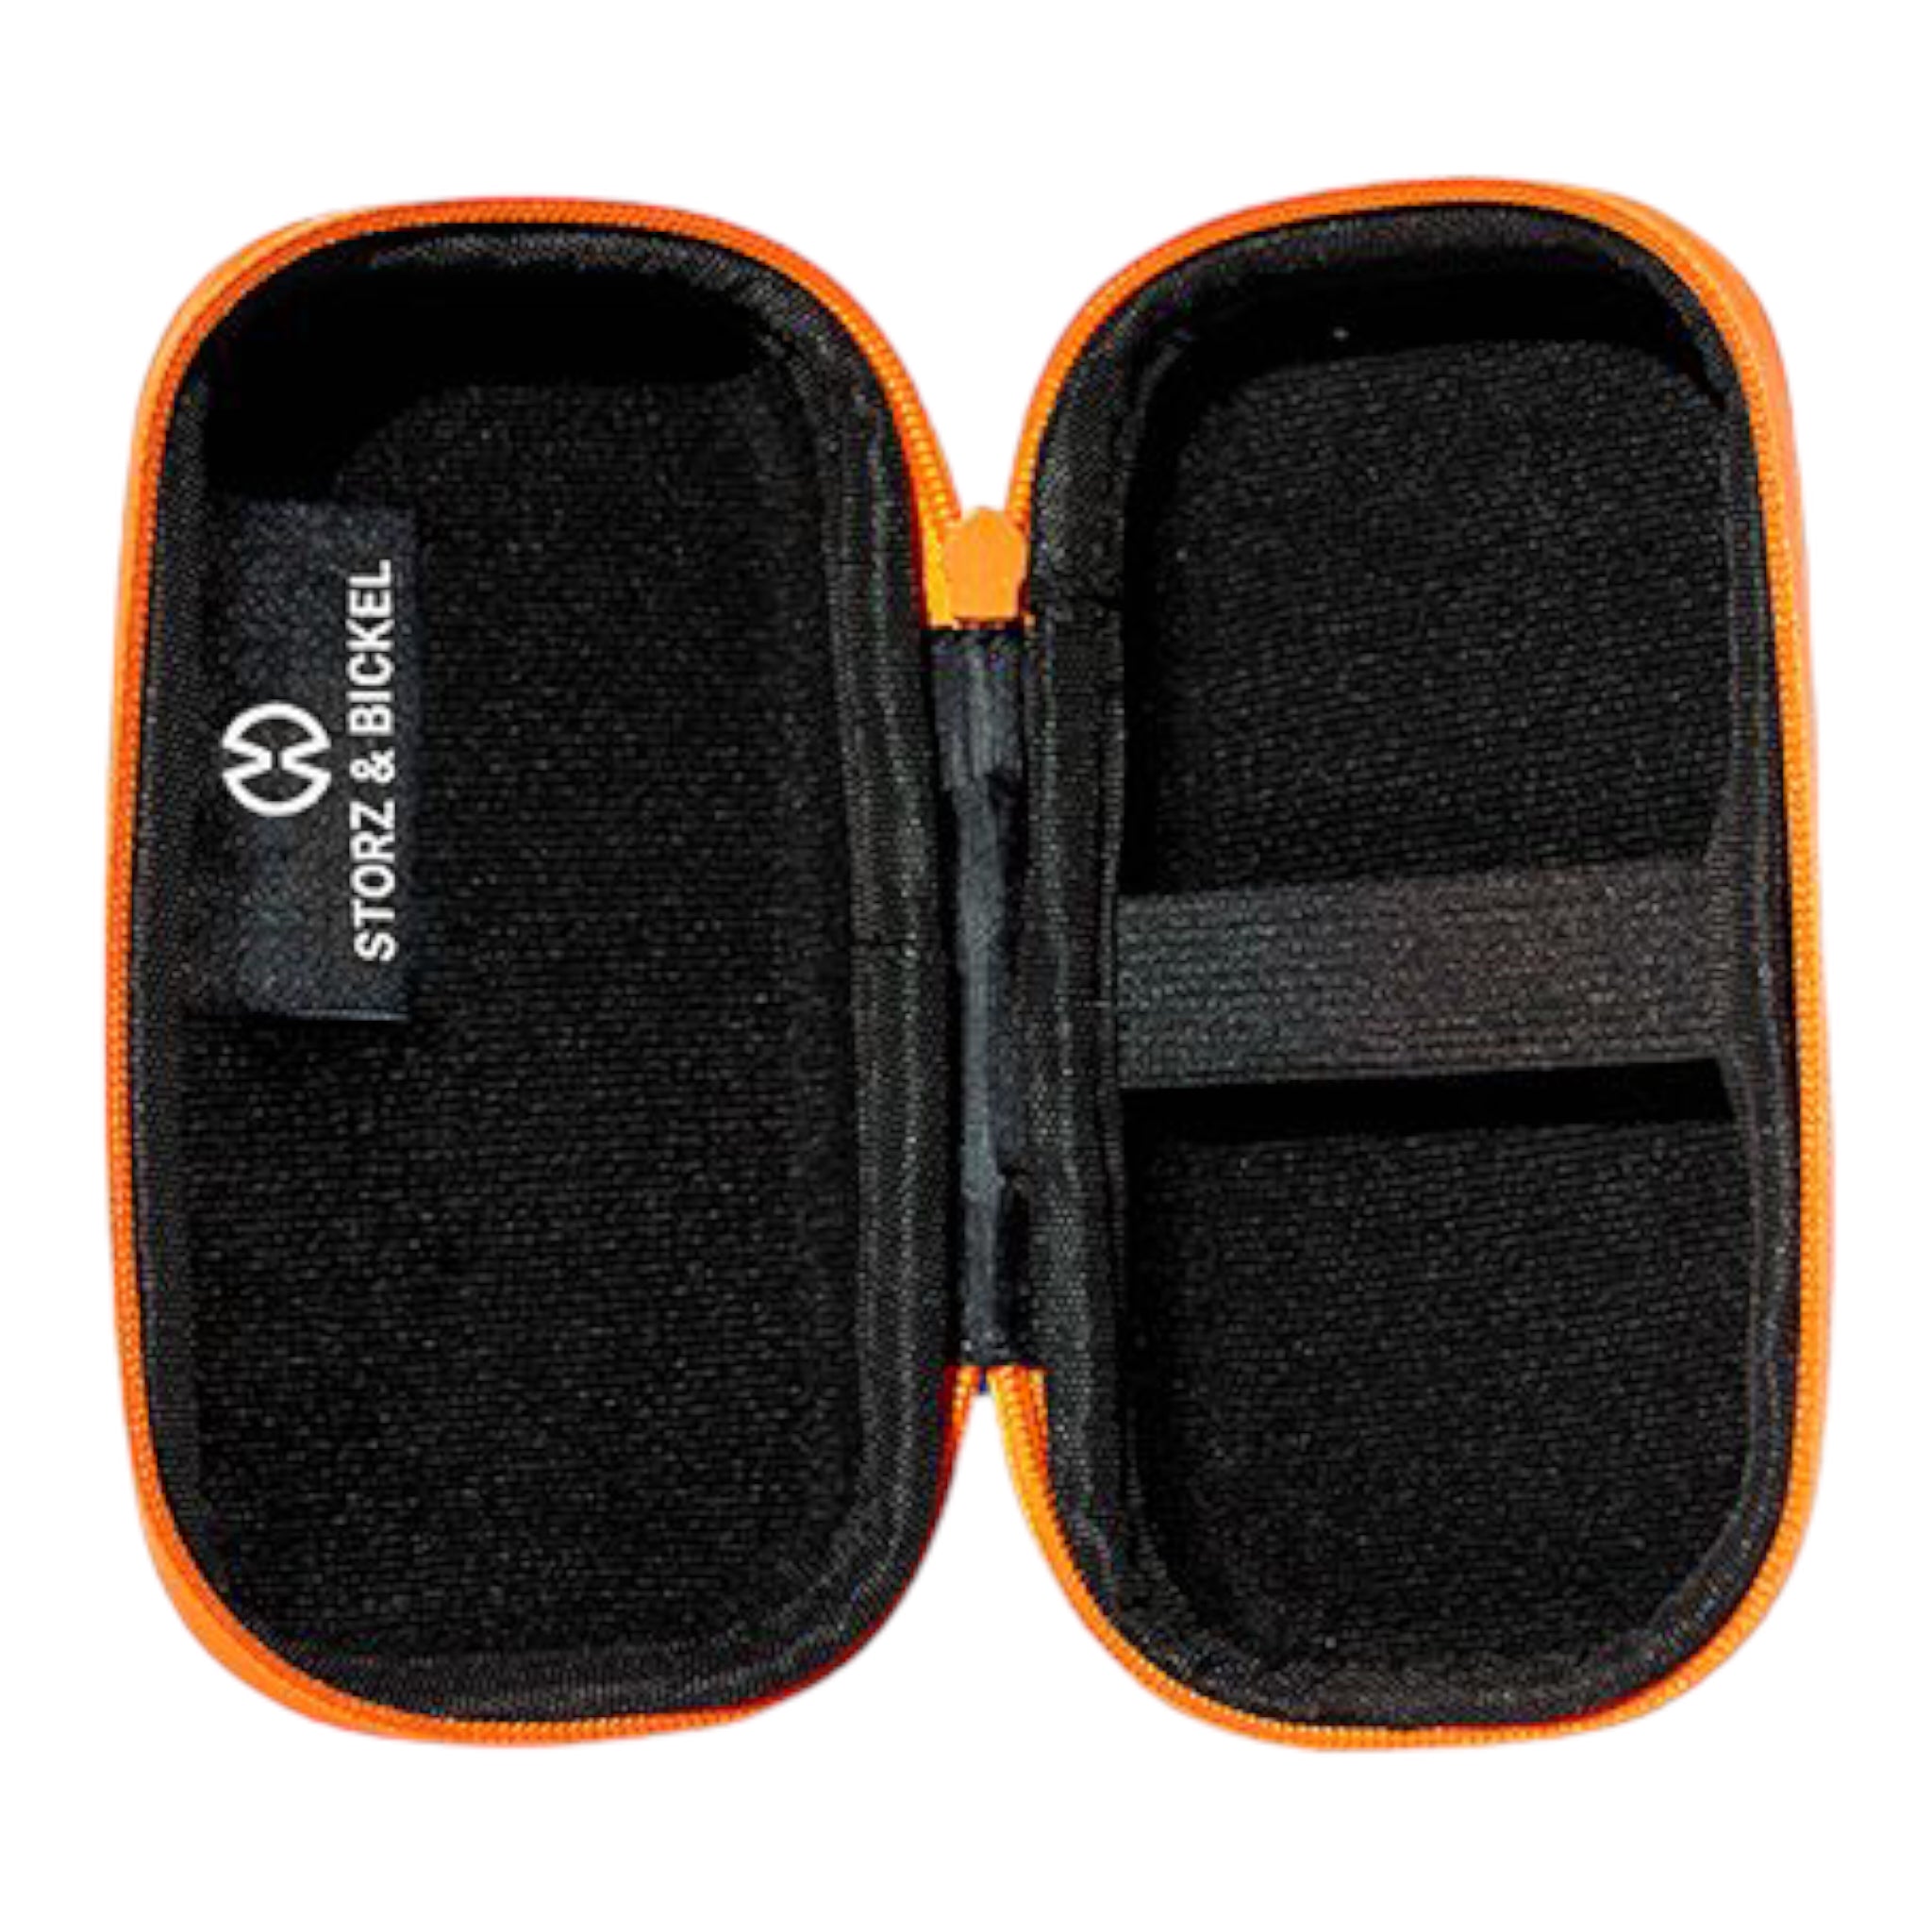 Storz And Bickel - Crafty+ Carrying Case